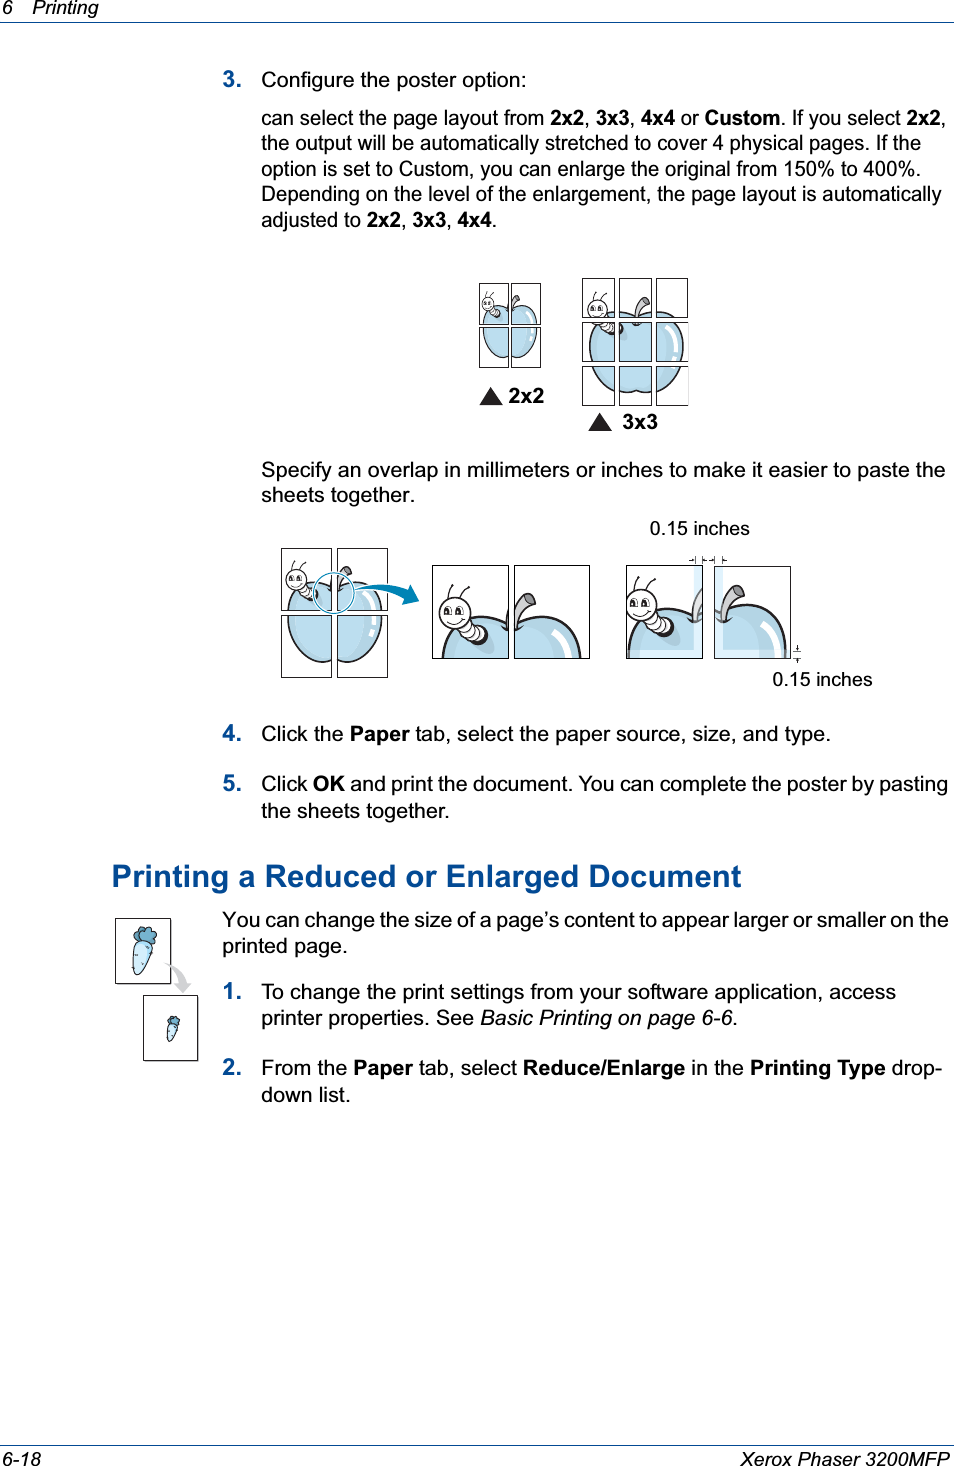 6Printing 6-18 Xerox Phaser 3200MFP3. Configure the poster option:can select the page layout from 2x2,3x3,4x4 or Custom. If you select 2x2,the output will be automatically stretched to cover 4 physical pages. If the option is set to Custom, you can enlarge the original from 150% to 400%. Depending on the level of the enlargement, the page layout is automatically adjusted to 2x2,3x3,4x4.Specify an overlap in millimeters or inches to make it easier to paste the sheets together. 4. Click the Paper tab, select the paper source, size, and type.5. Click OK and print the document. You can complete the poster by pasting the sheets together. Printing a Reduced or Enlarged Document You can change the size of a page’s content to appear larger or smaller on the printed page. 1. To change the print settings from your software application, access printer properties. See Basic Printing on page 6-6.2. From the Paper tab, select Reduce/Enlarge in the Printing Type drop-down list. 2x23x30.15 inches0.15 inches